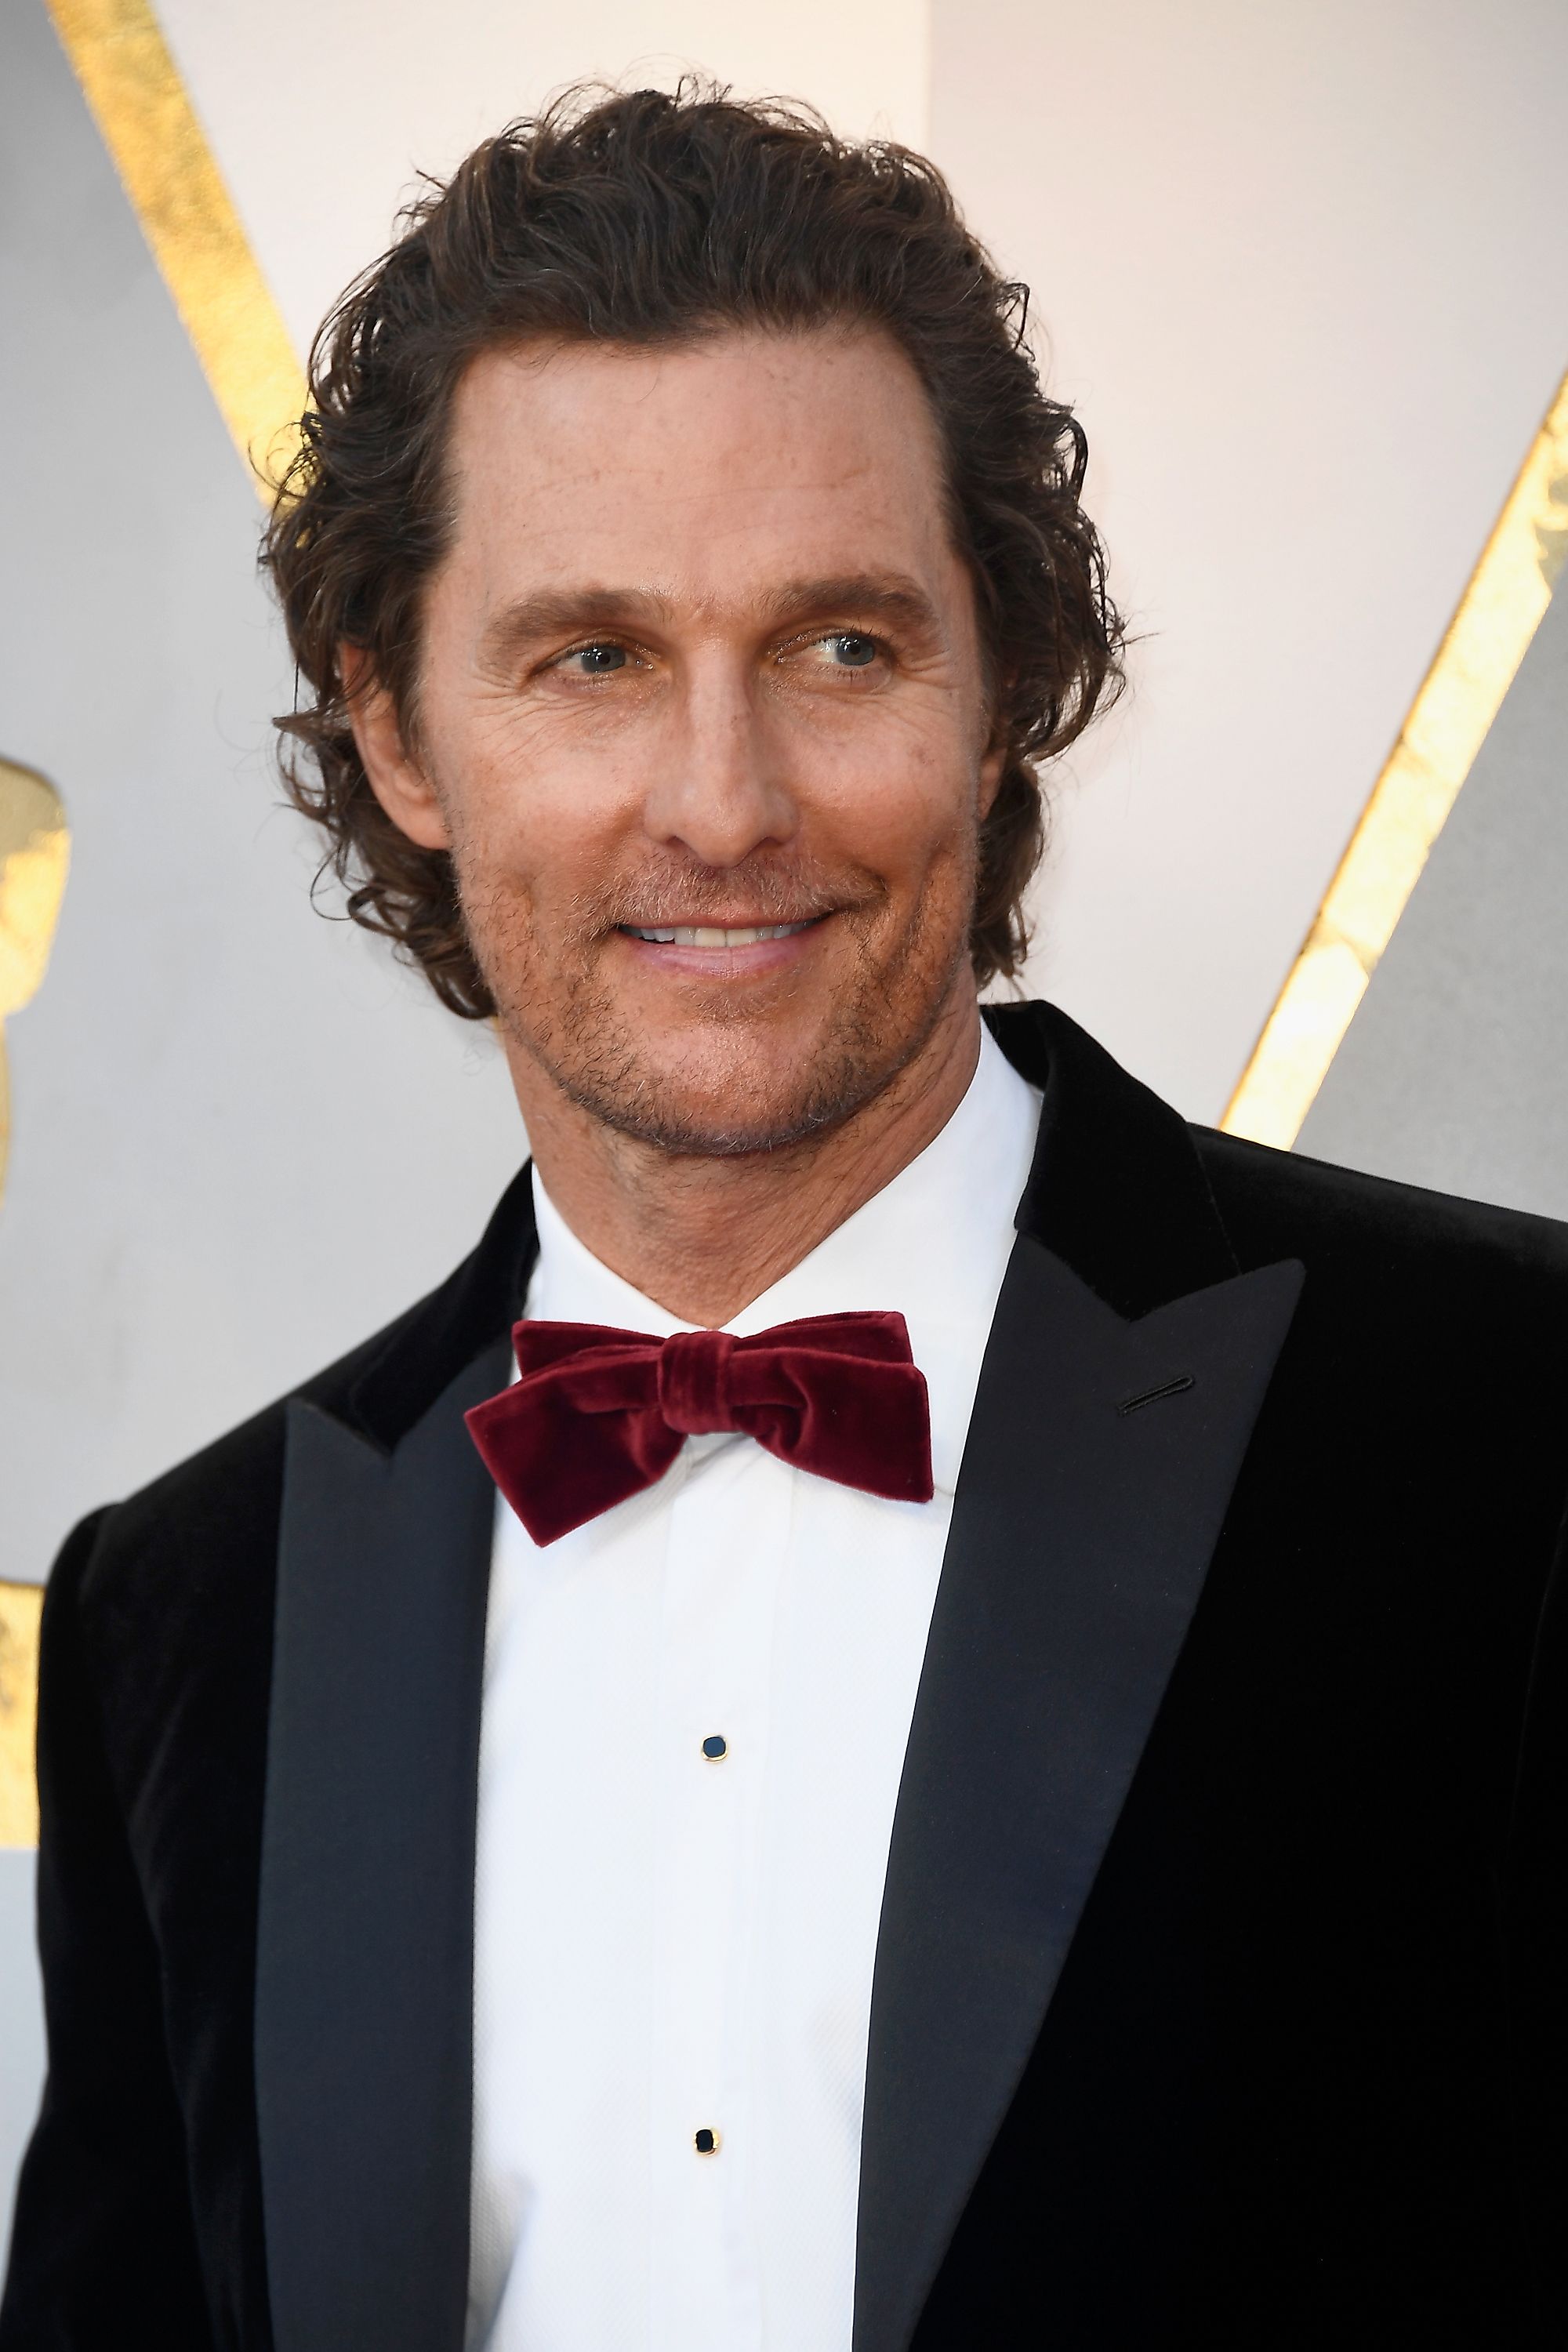 Matthew McConaughey attends the 90th Annual Academy Awards at Hollywood & Highland Center on March 4, 2018 in Hollywood, California. | Source: Getty Images